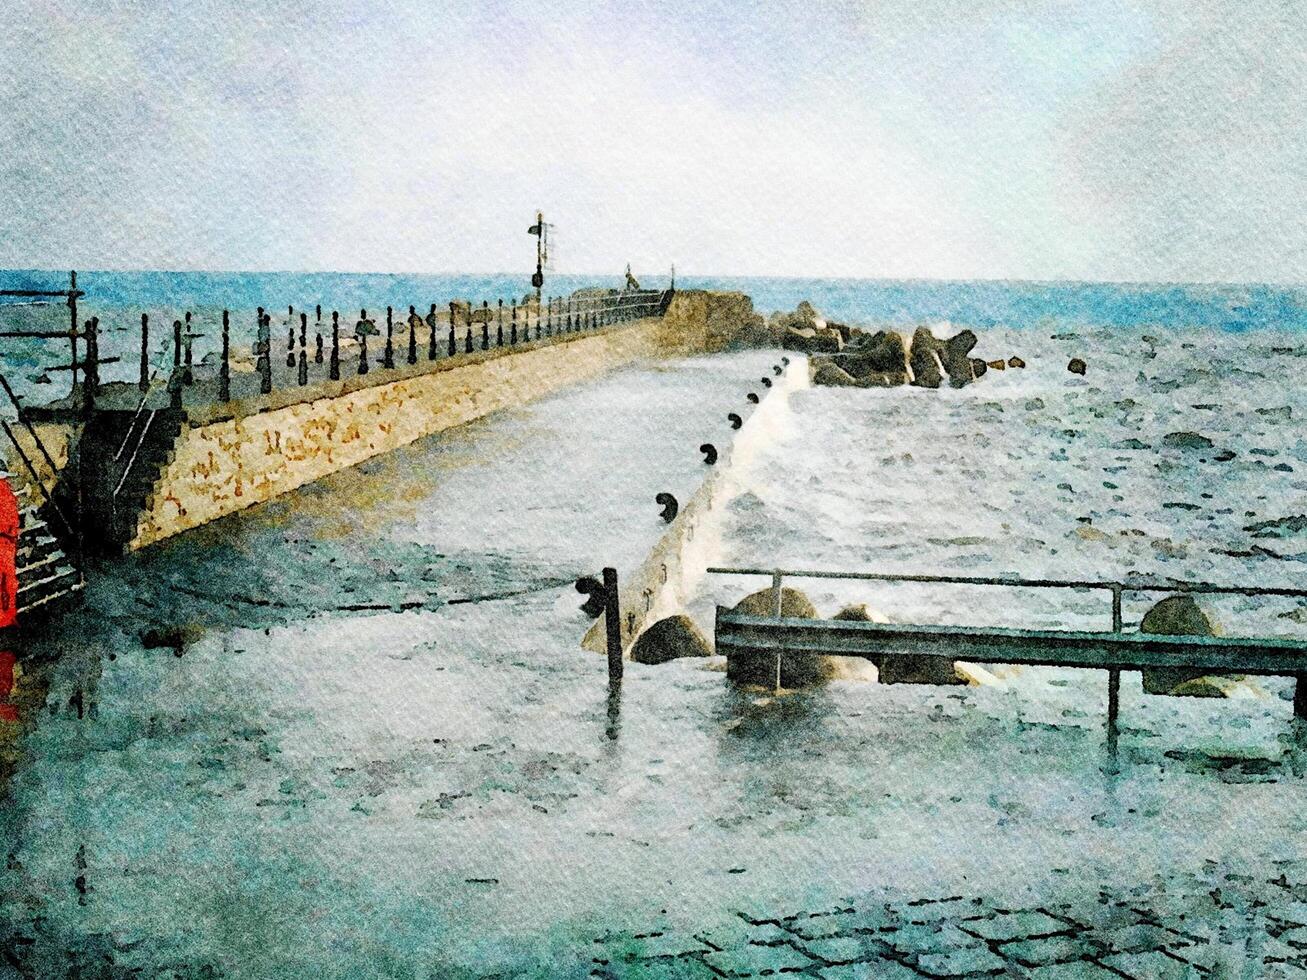 Digital watercolor style of a glimpse of the Amalfi pier with the rough sea during the winter photo